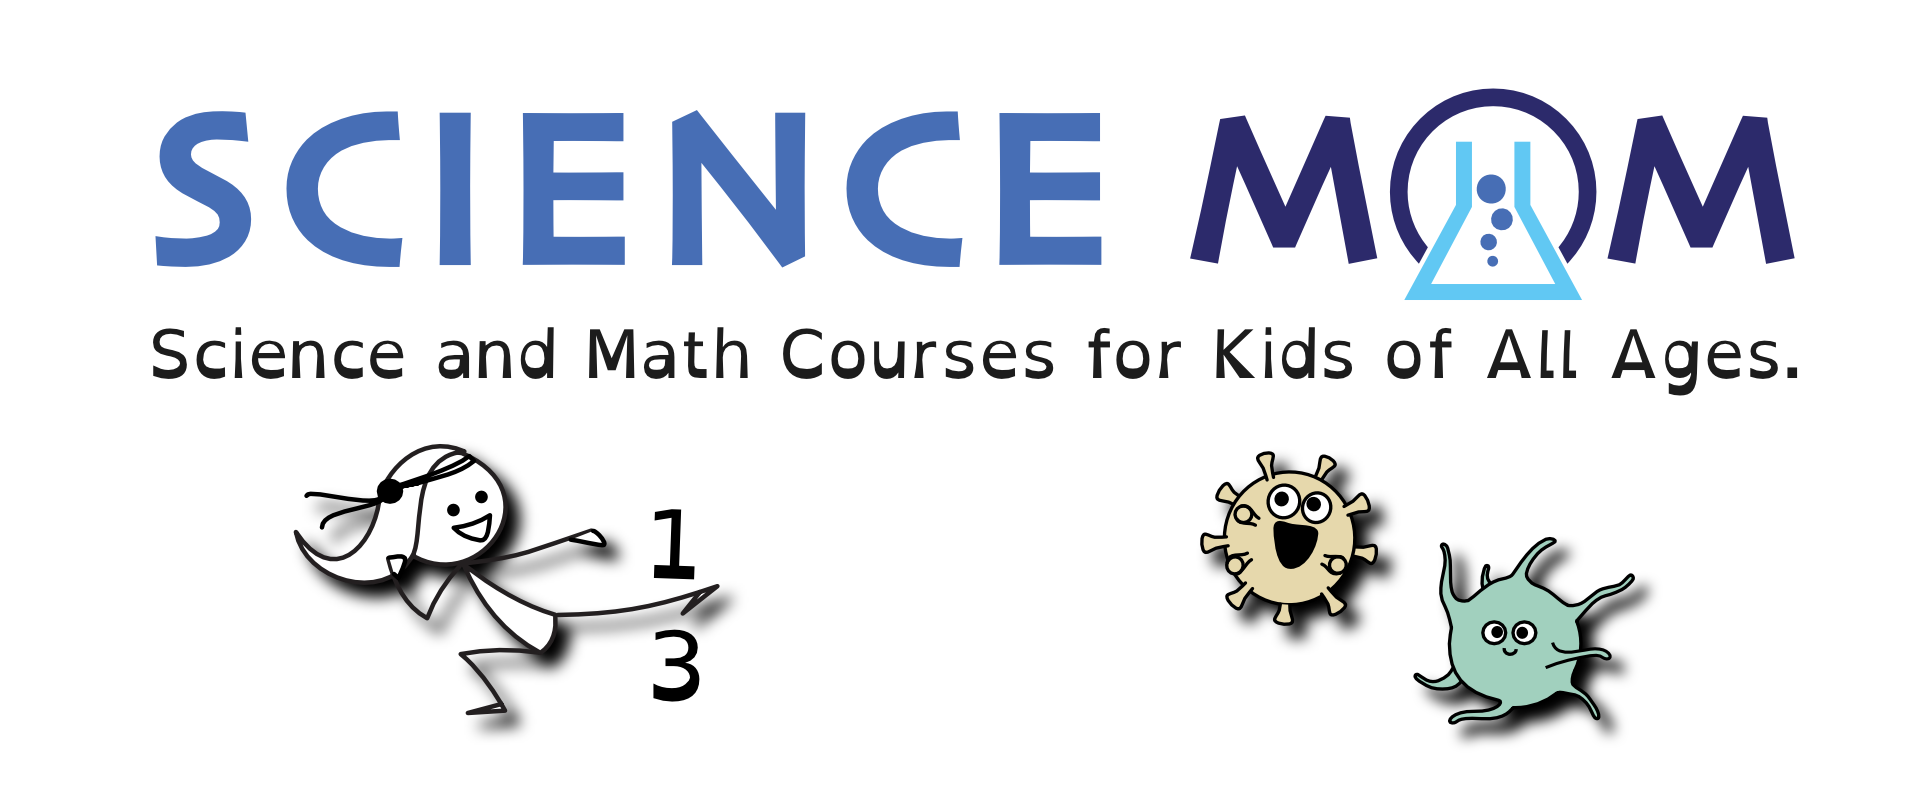 Science Mom logo and the text &quot;Science and Math Courses for Kids of All Ages&quot; along with some cute critter drawings.